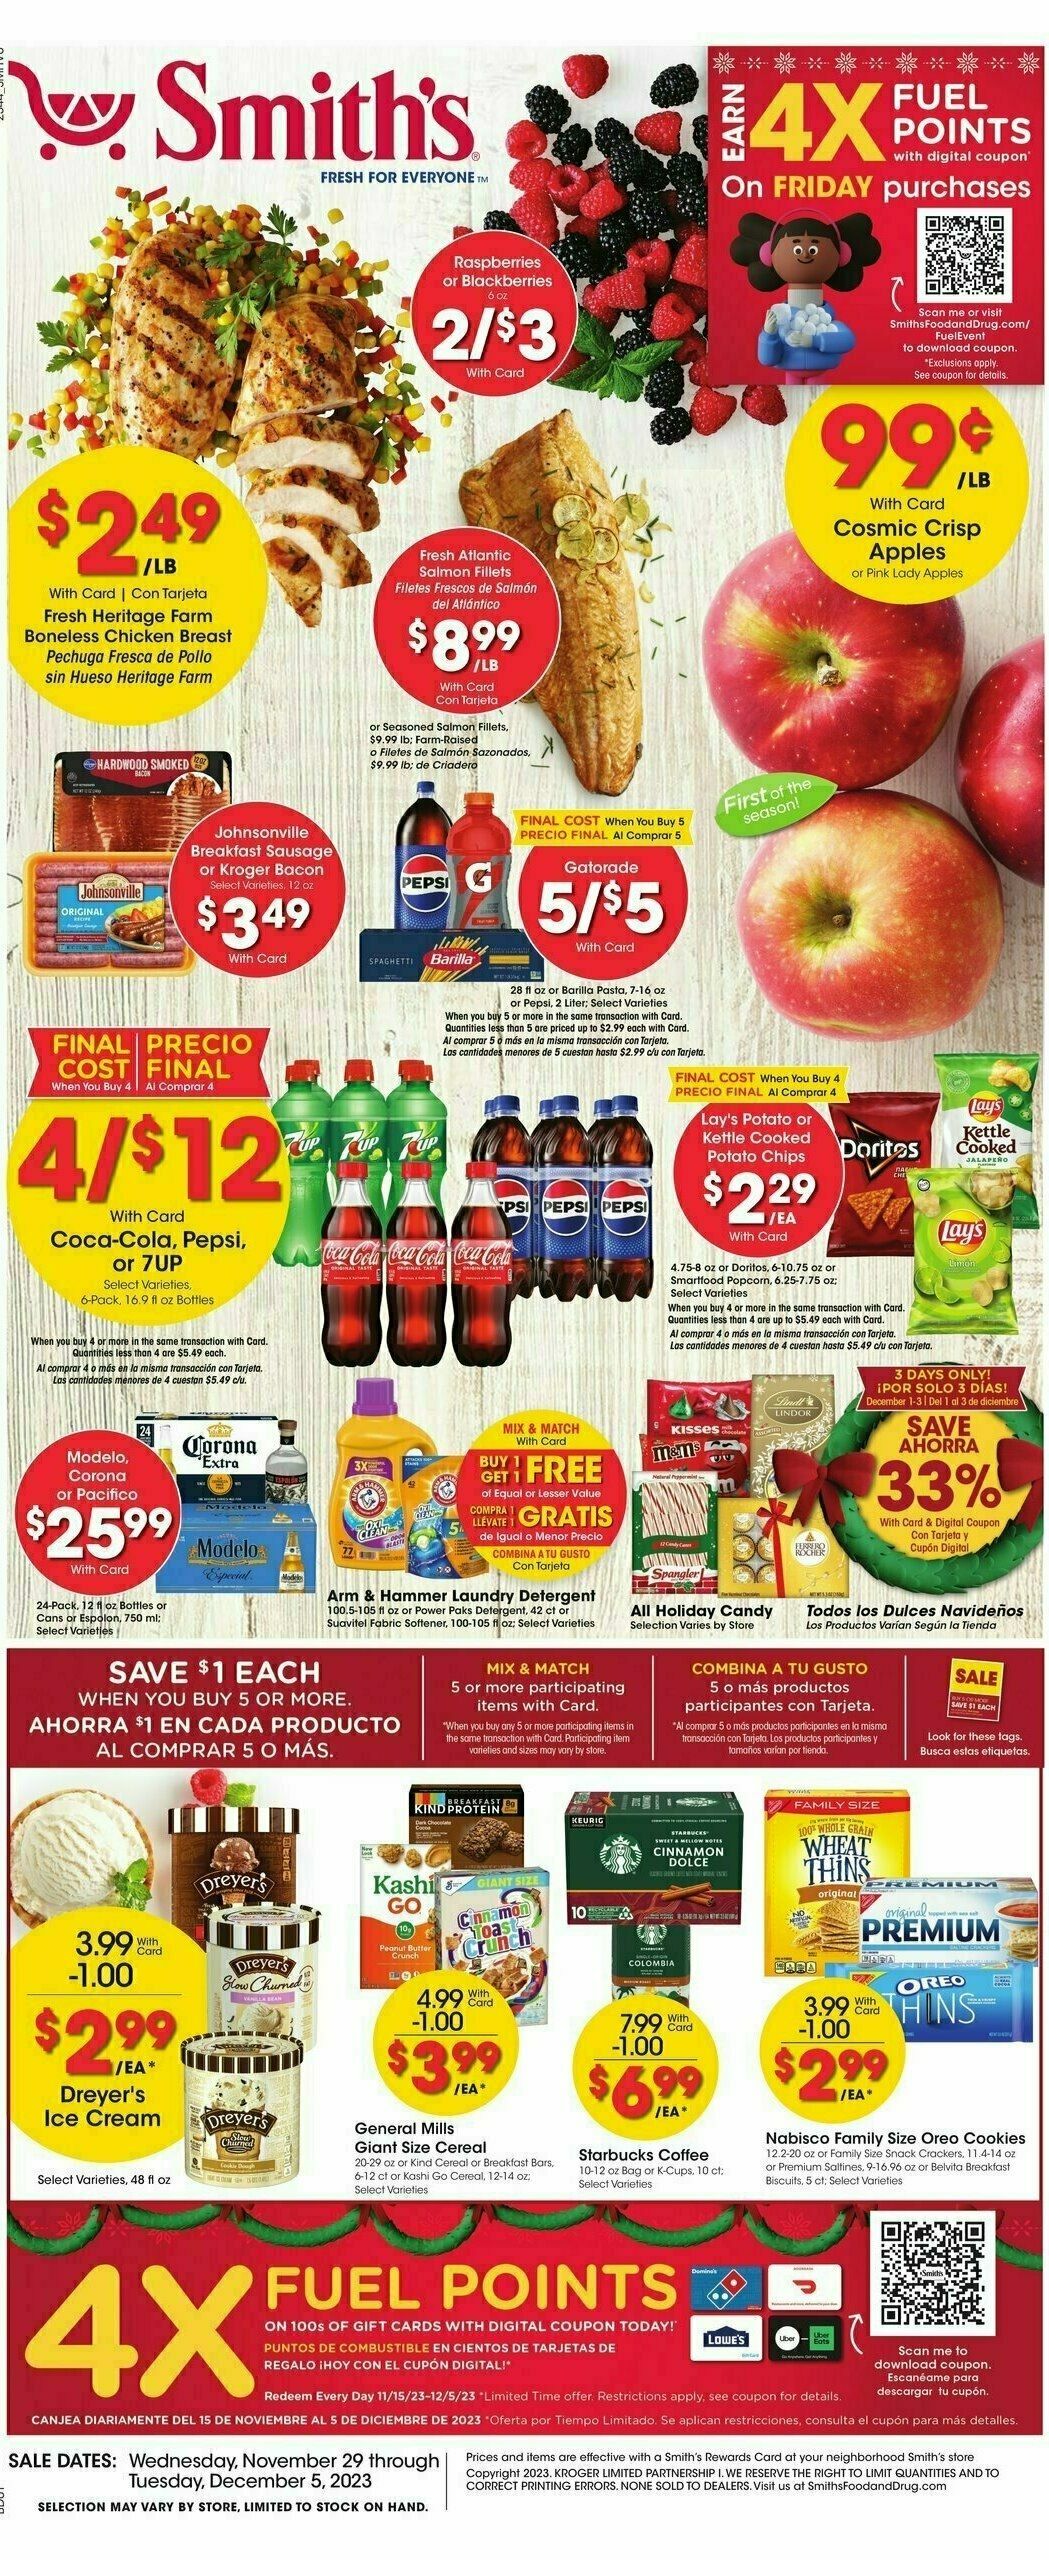 Smith's Weekly Ad from November 29